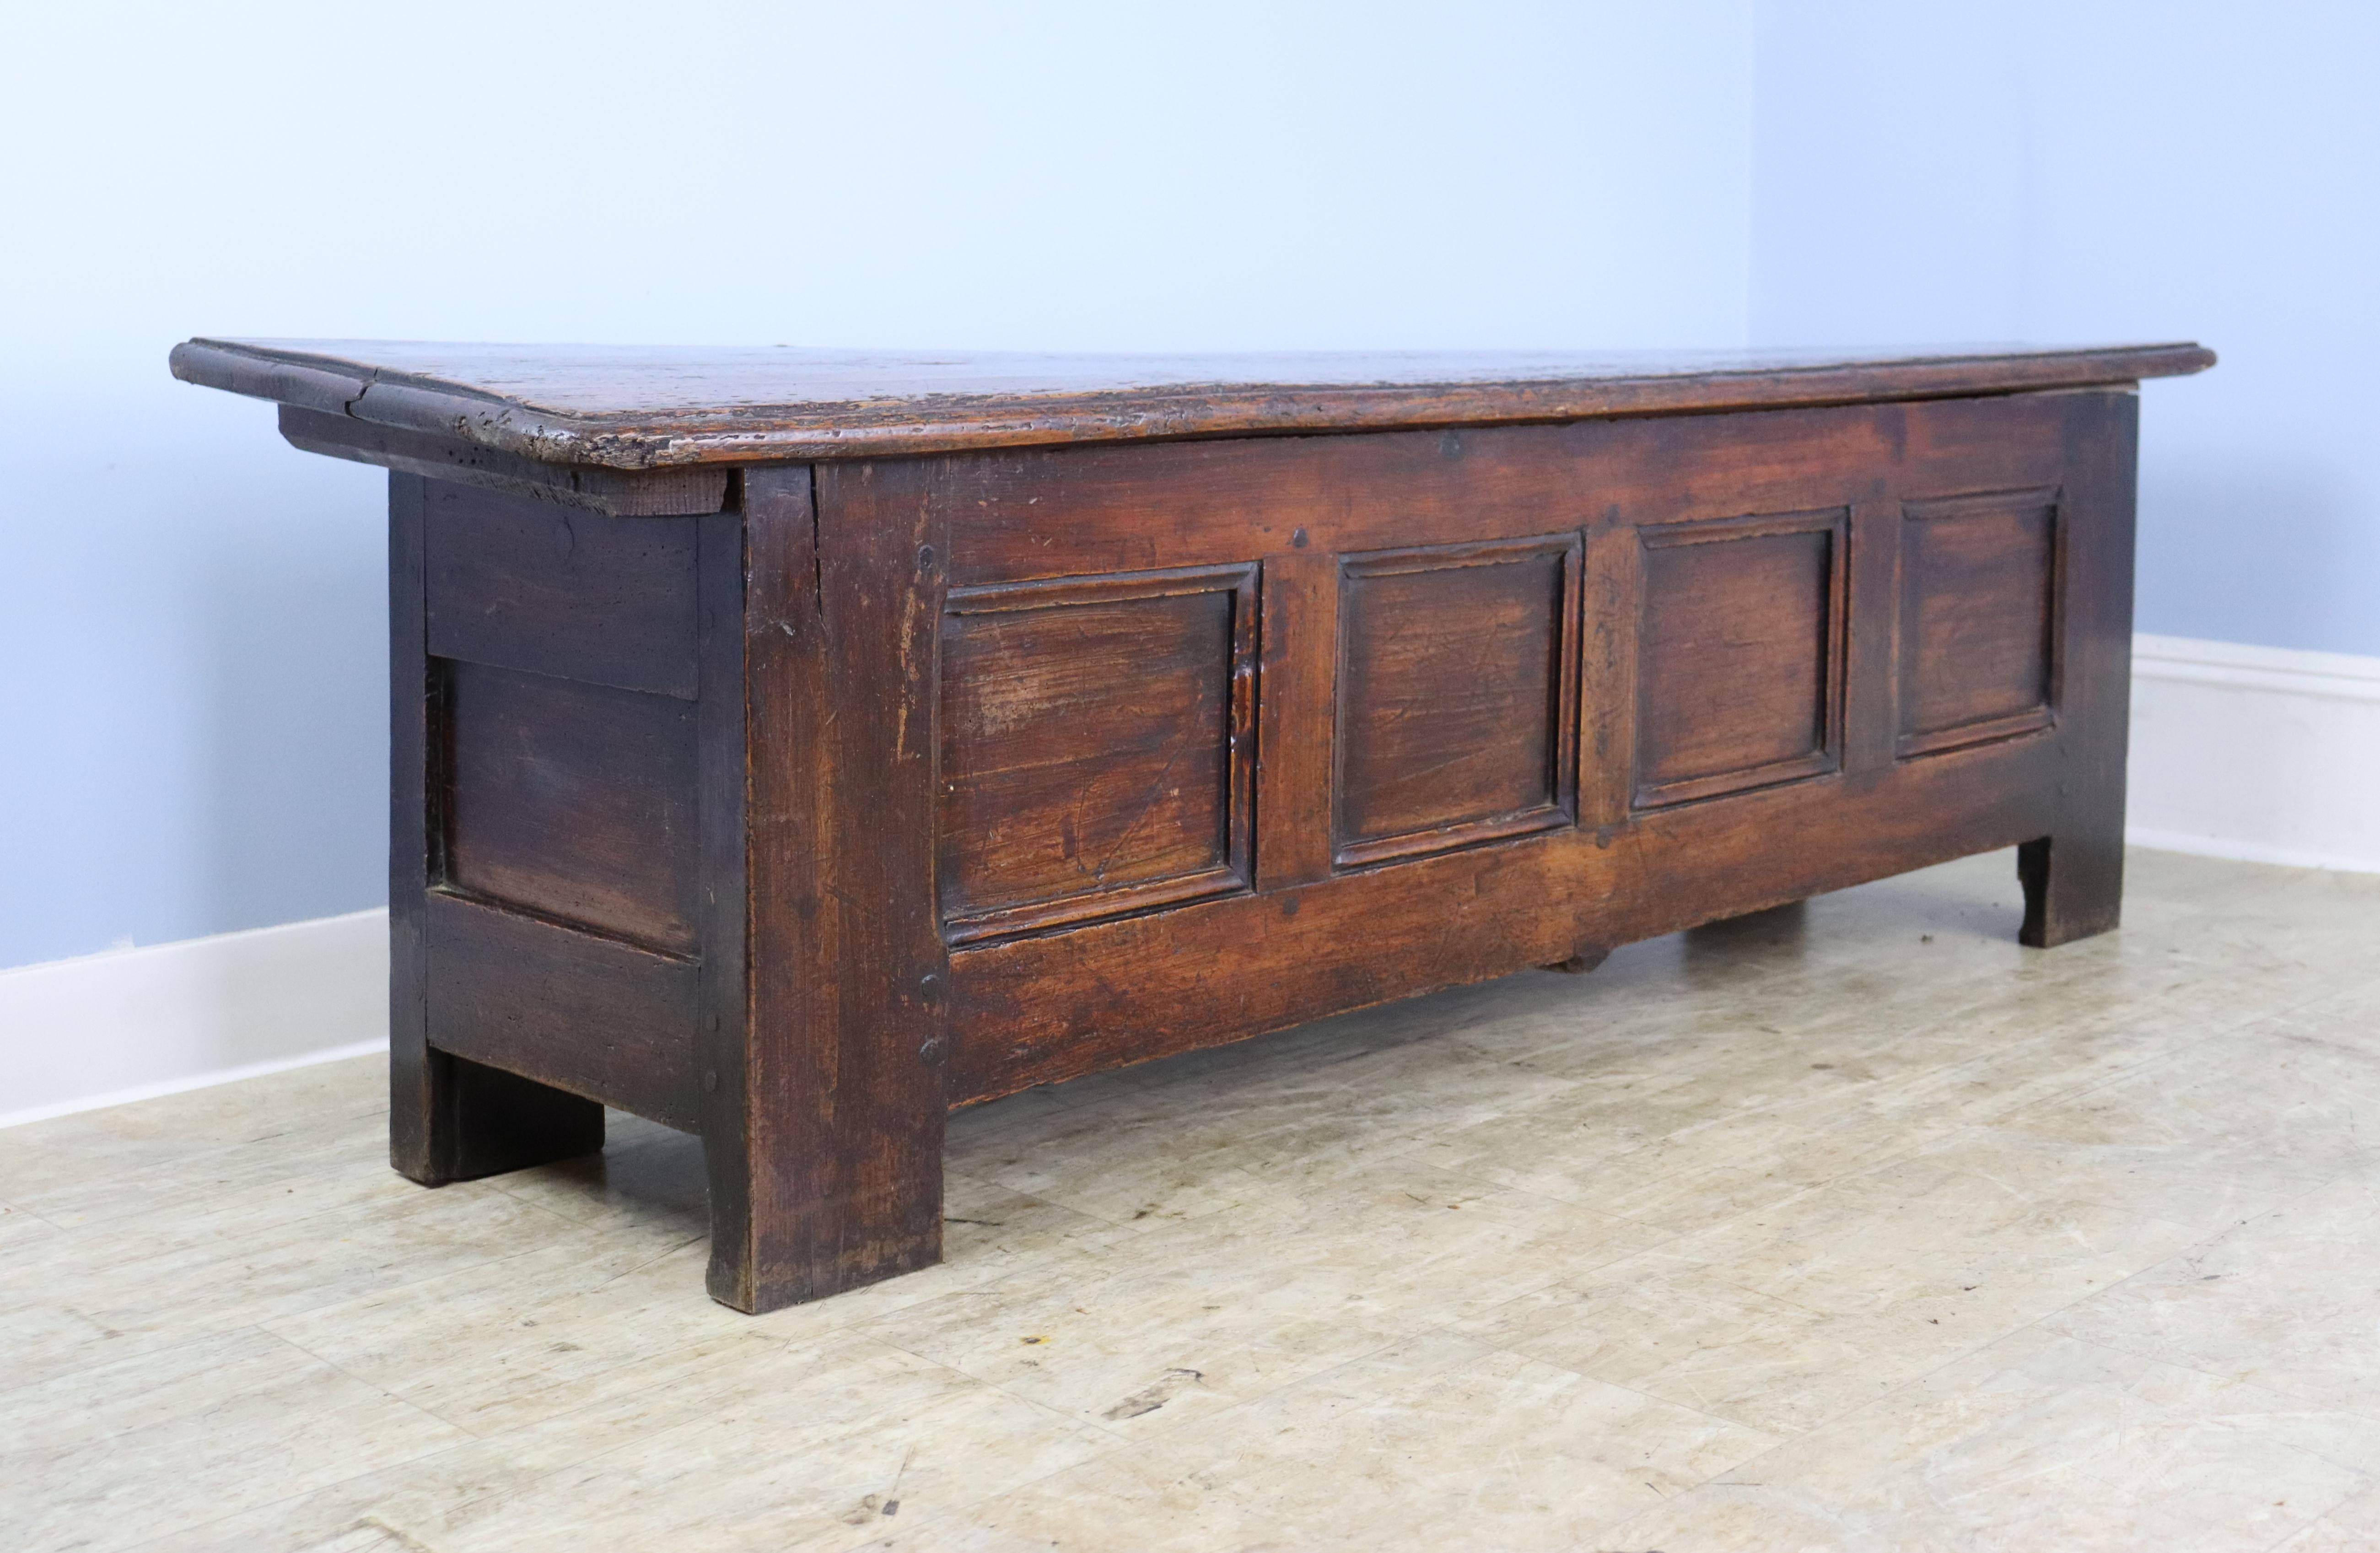 An antique pine coffer from France. Nice age and patina. Top lifts up for good storage. Works well at the foot of a bed or under a window, as a narrow coffee table and as a blanket chest or trunk. A good bench height, for sitting. The top of this